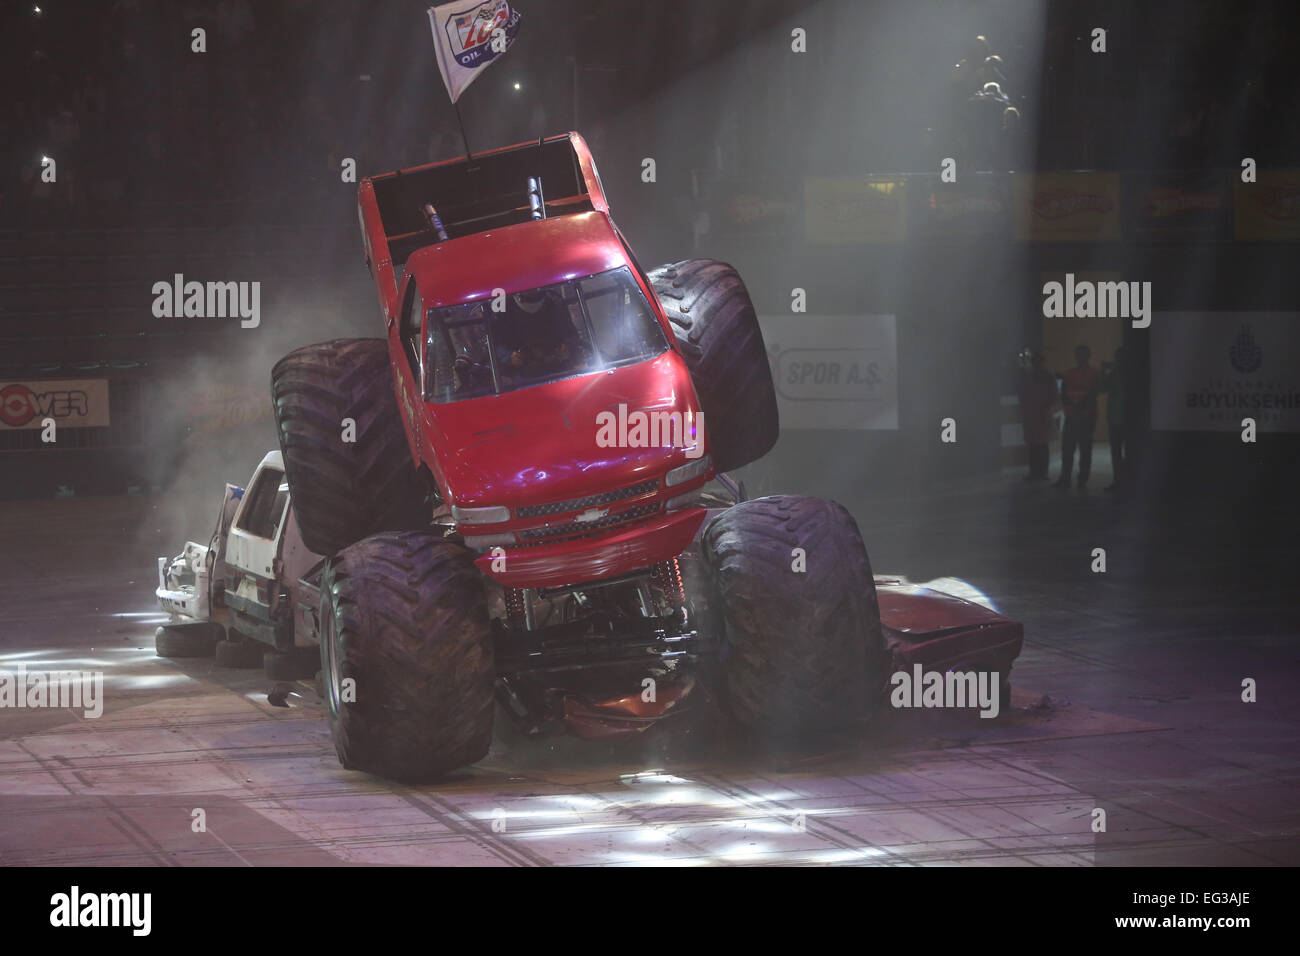 ISTANBUL, TURKEY - FEBRUARY 01, 2015: Monster Truck Lil Devil crush to old cars in Sinan Erdem Dome during Monster Hot Wheels st Stock Photo